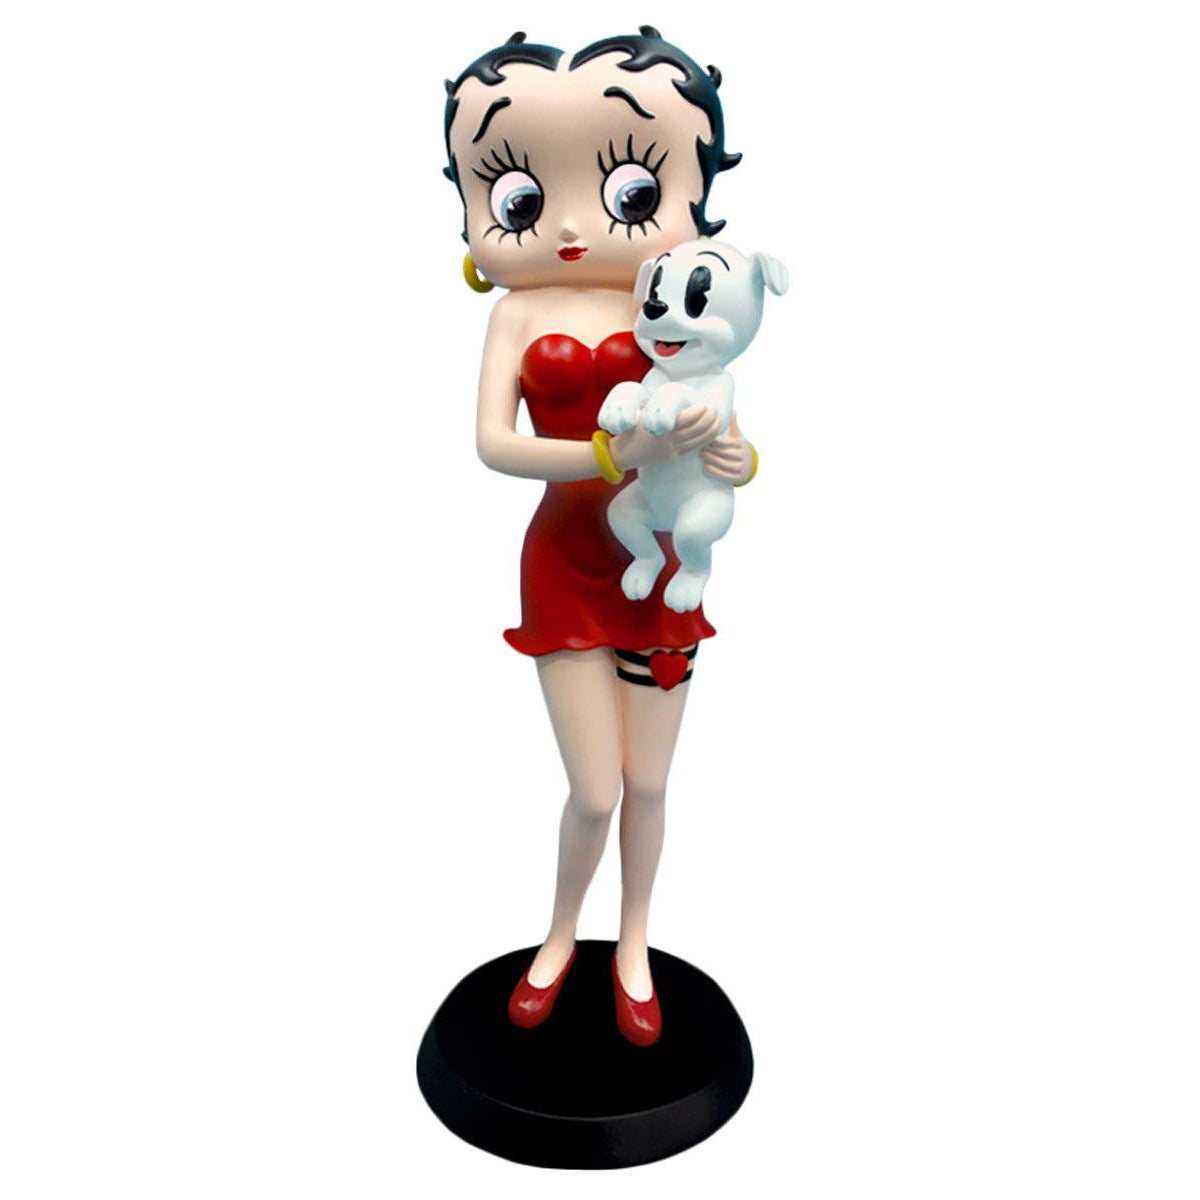 Betty Boop Holding Pudgy (Betty Boop) - Gallery Gifts Online 